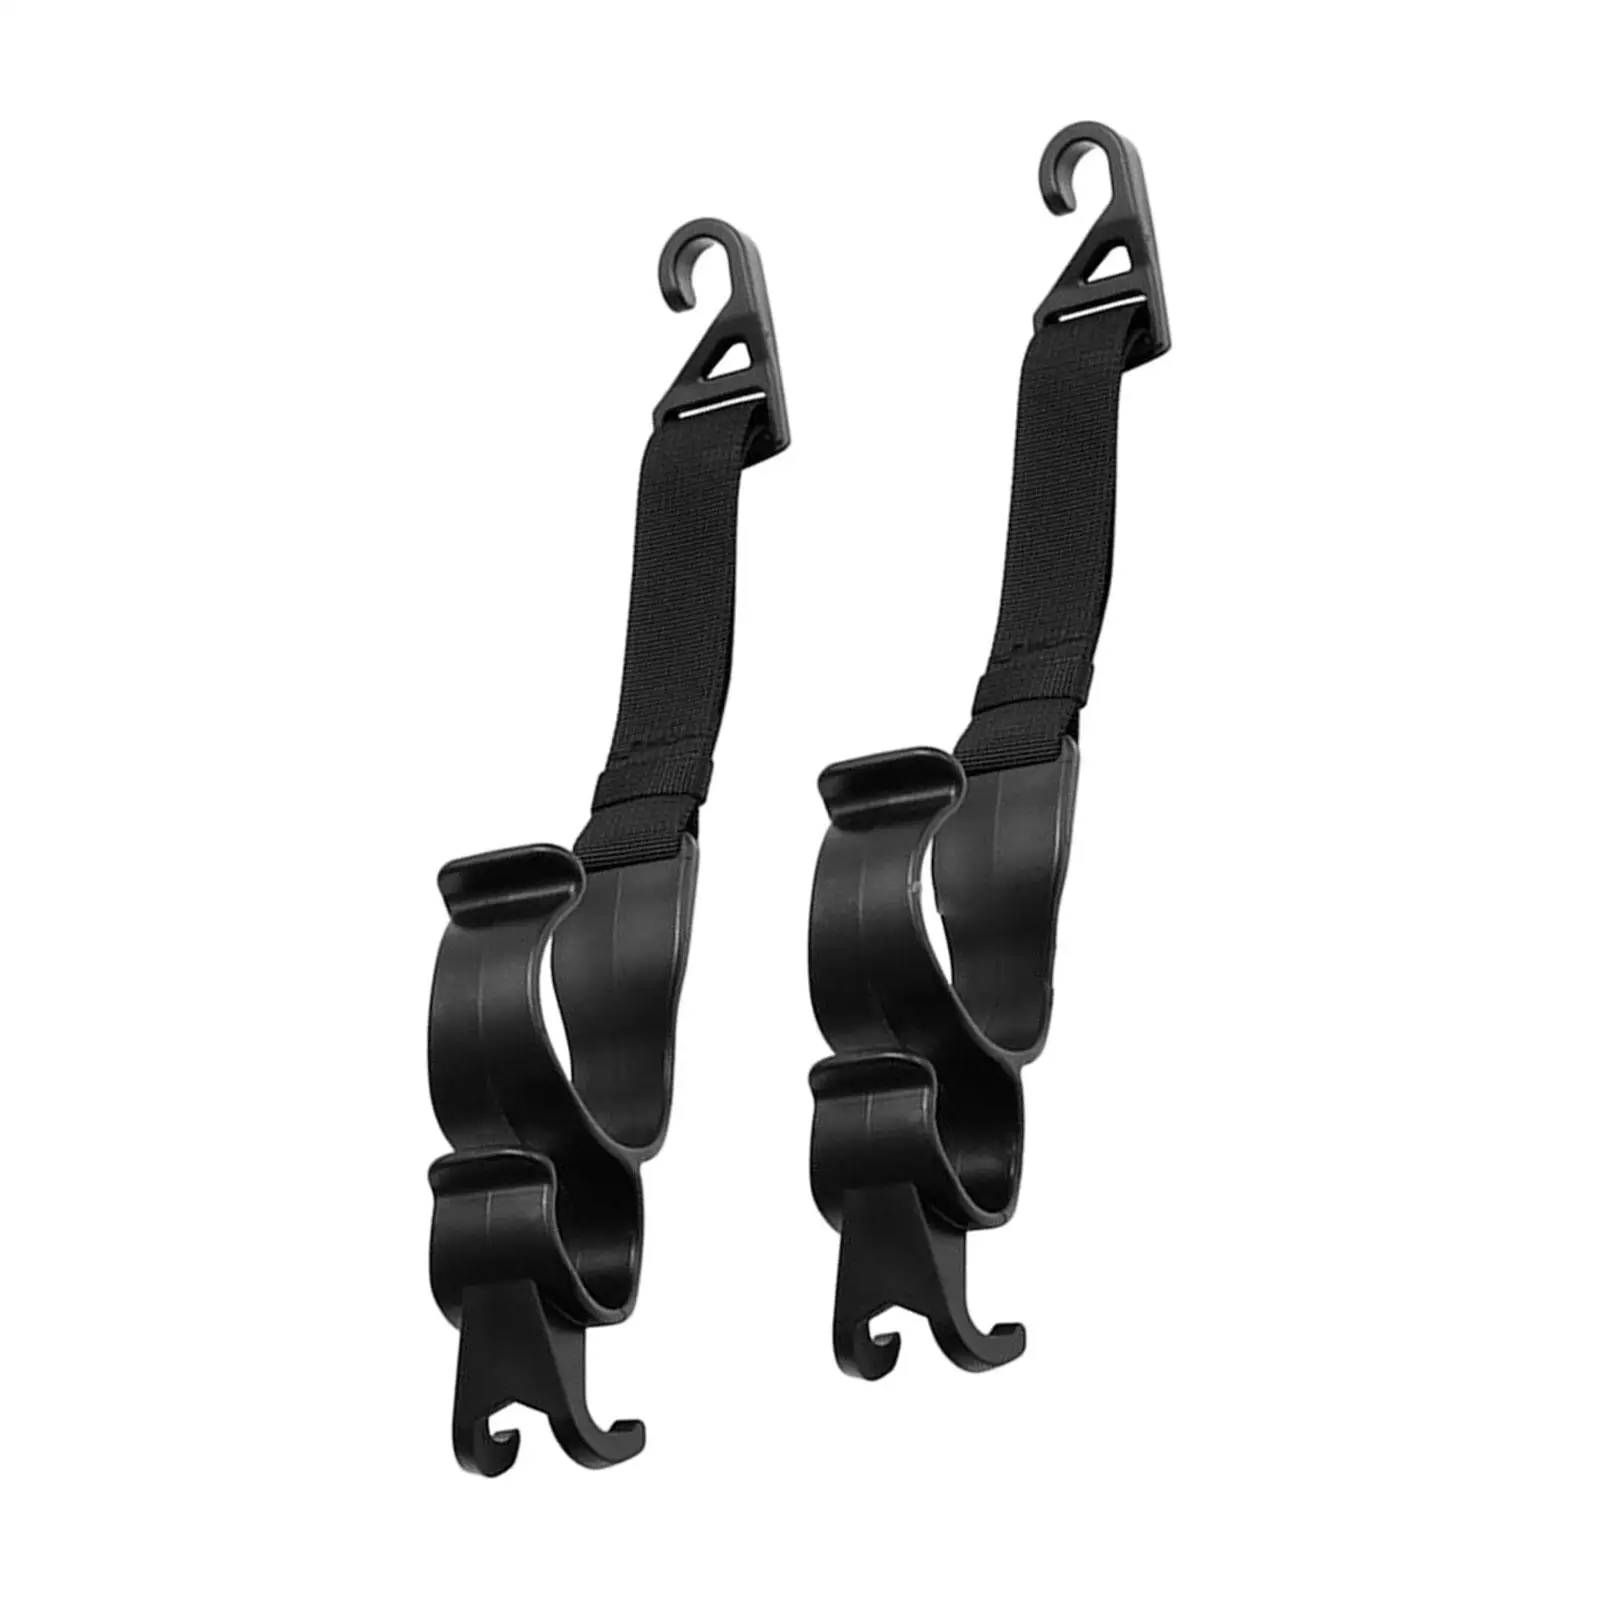 2 Pieces Car Seat hook for headrests Load Bearing to 15kg for Toys